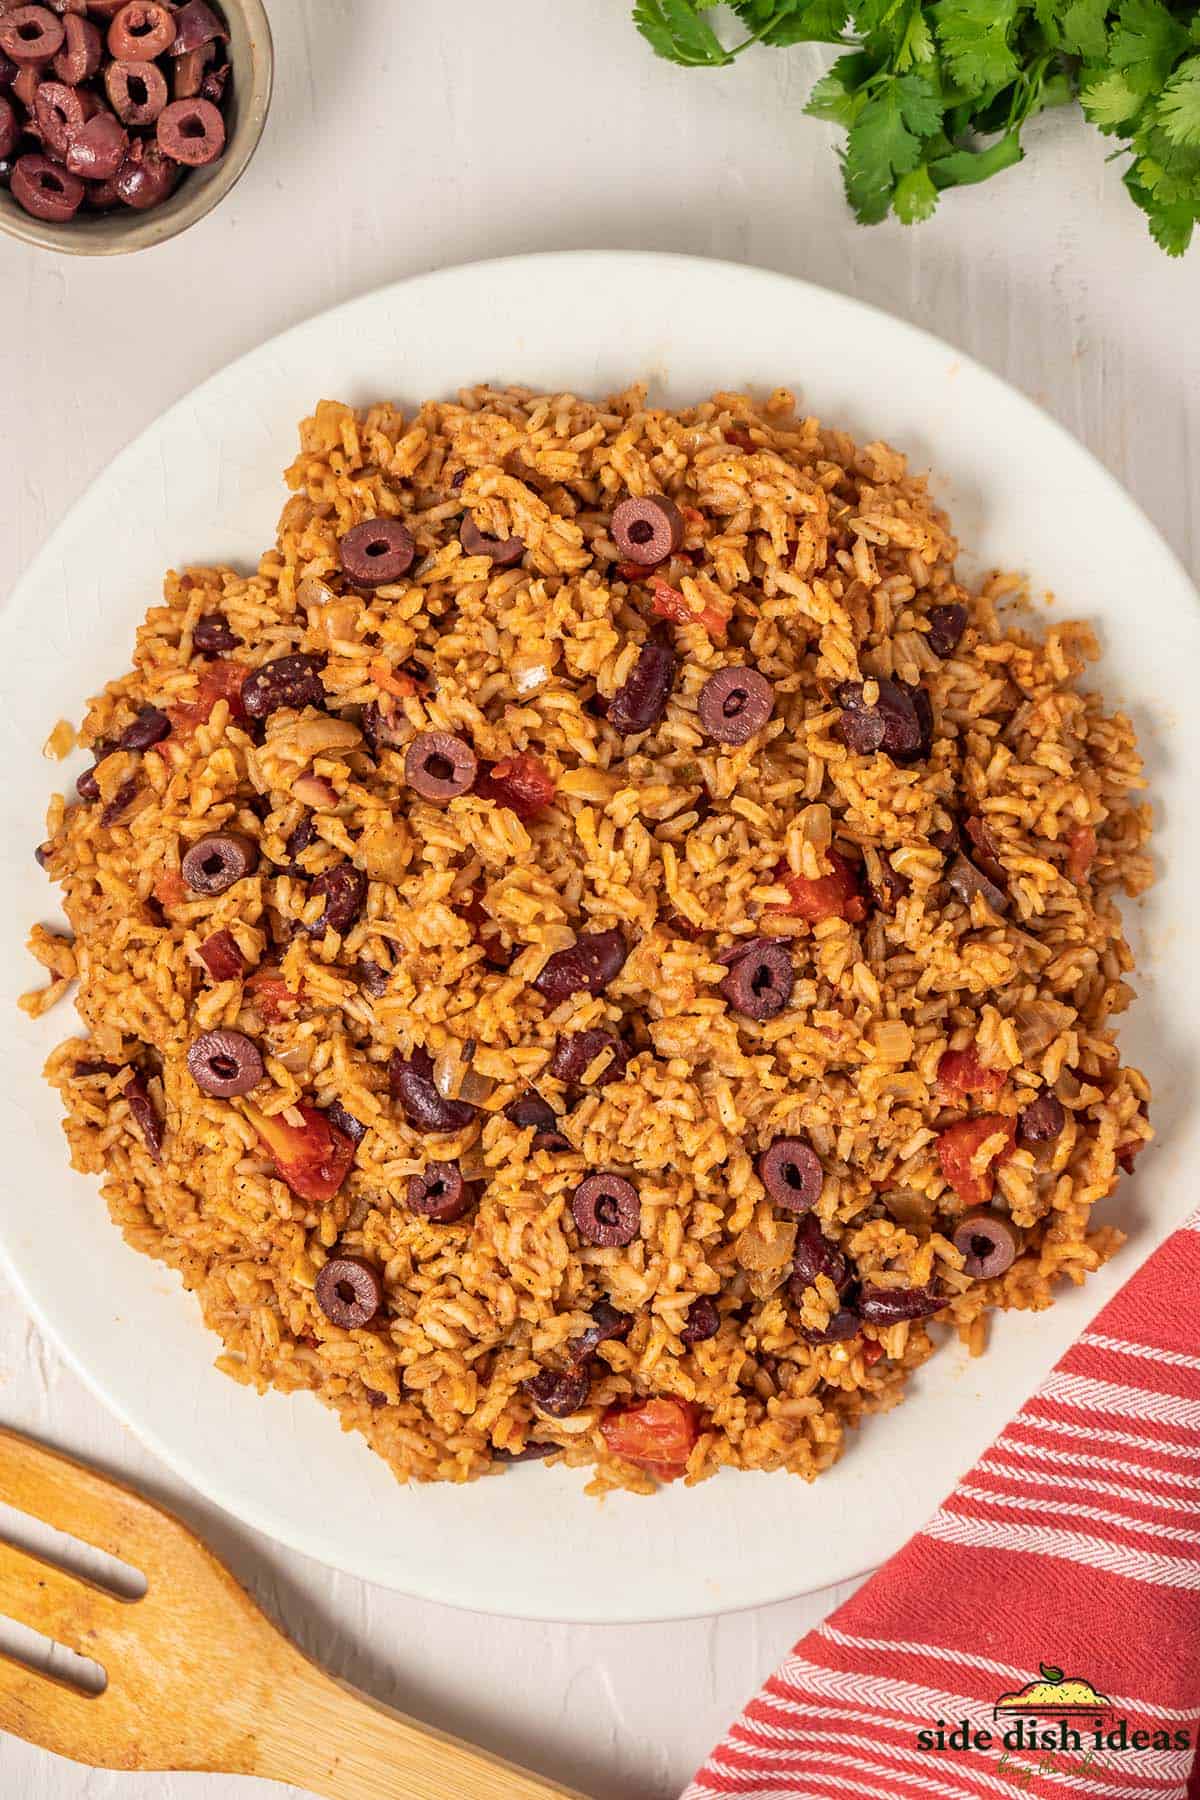 a big serving plate filled with Spanish rice and beans